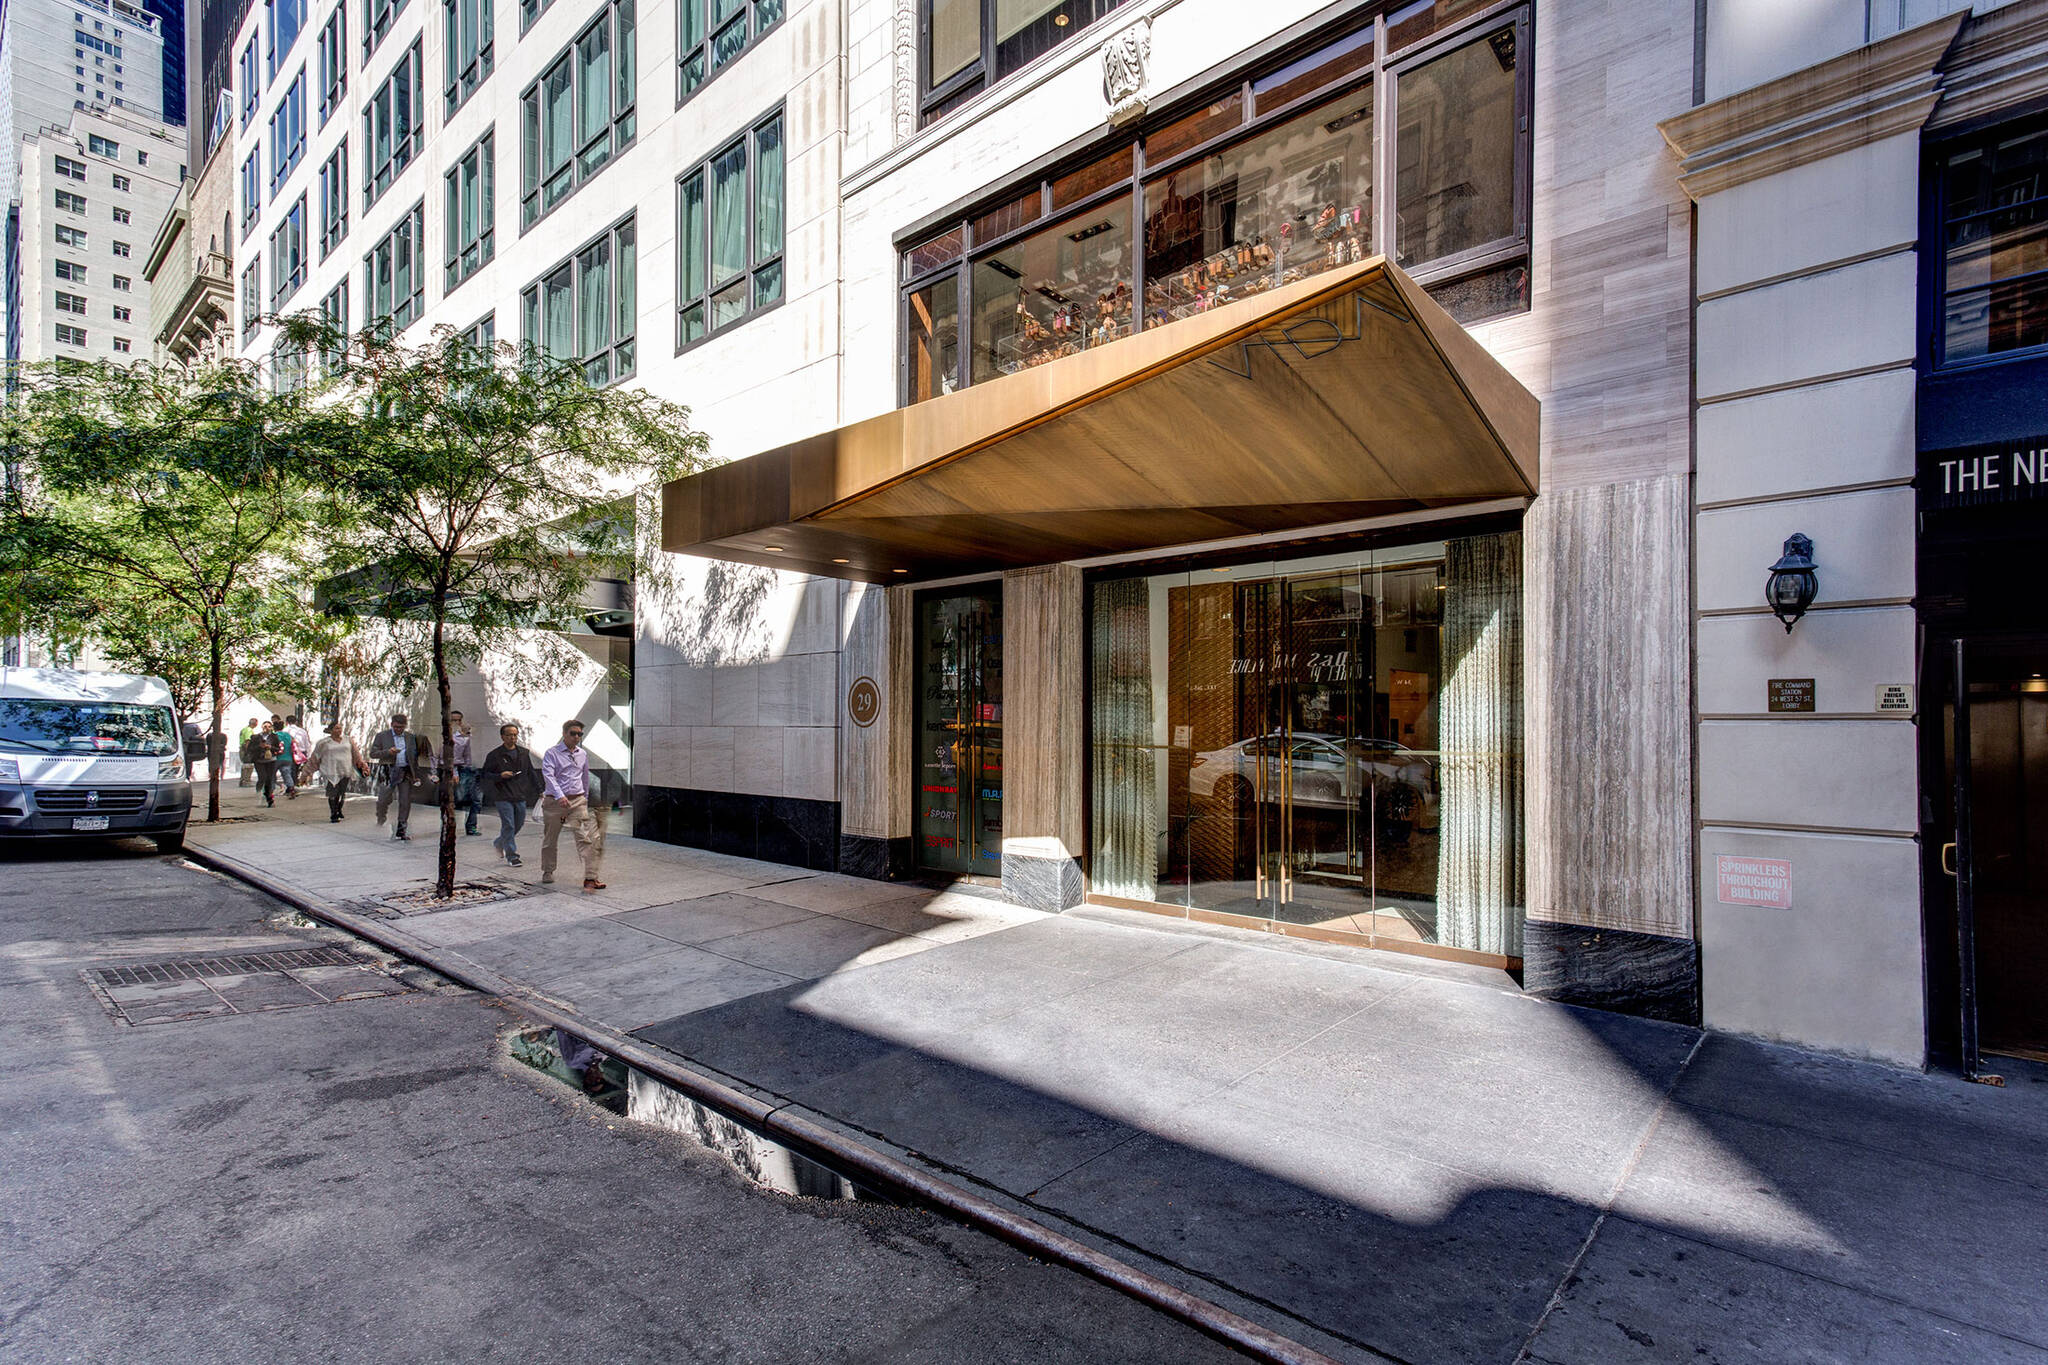 Sidewalk view of the Vida Shoes International canopy project for the shop located at 29 West 56th Street in Midtown, New York City designed by the architecture studio Danny Forster & Architecture